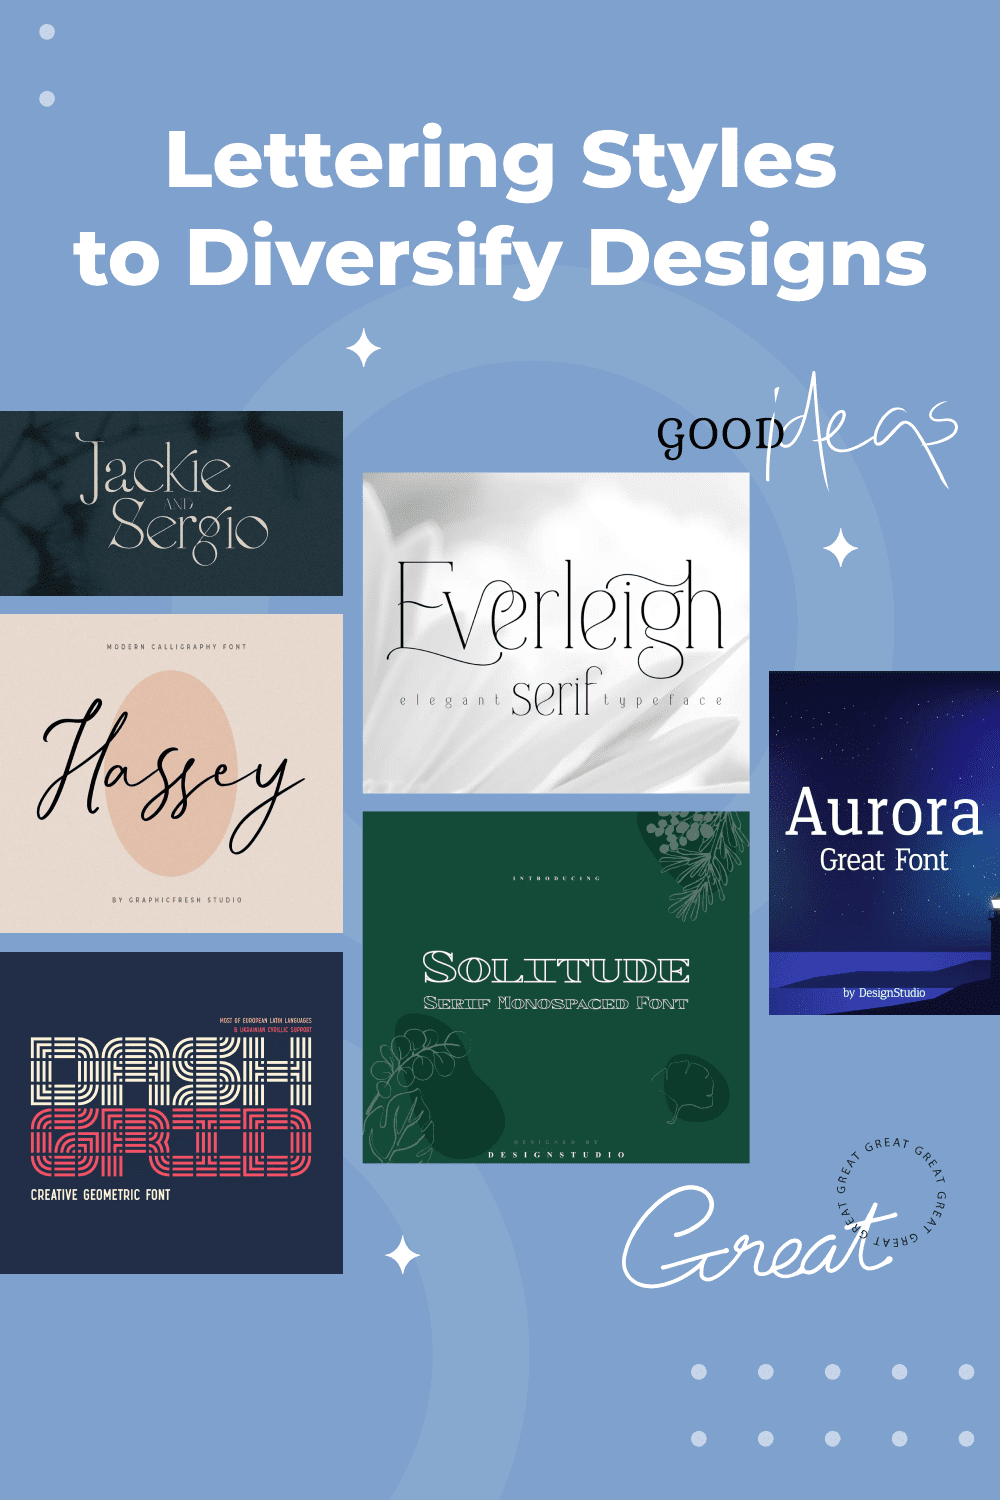 lettering styles to diversify designs pinterest